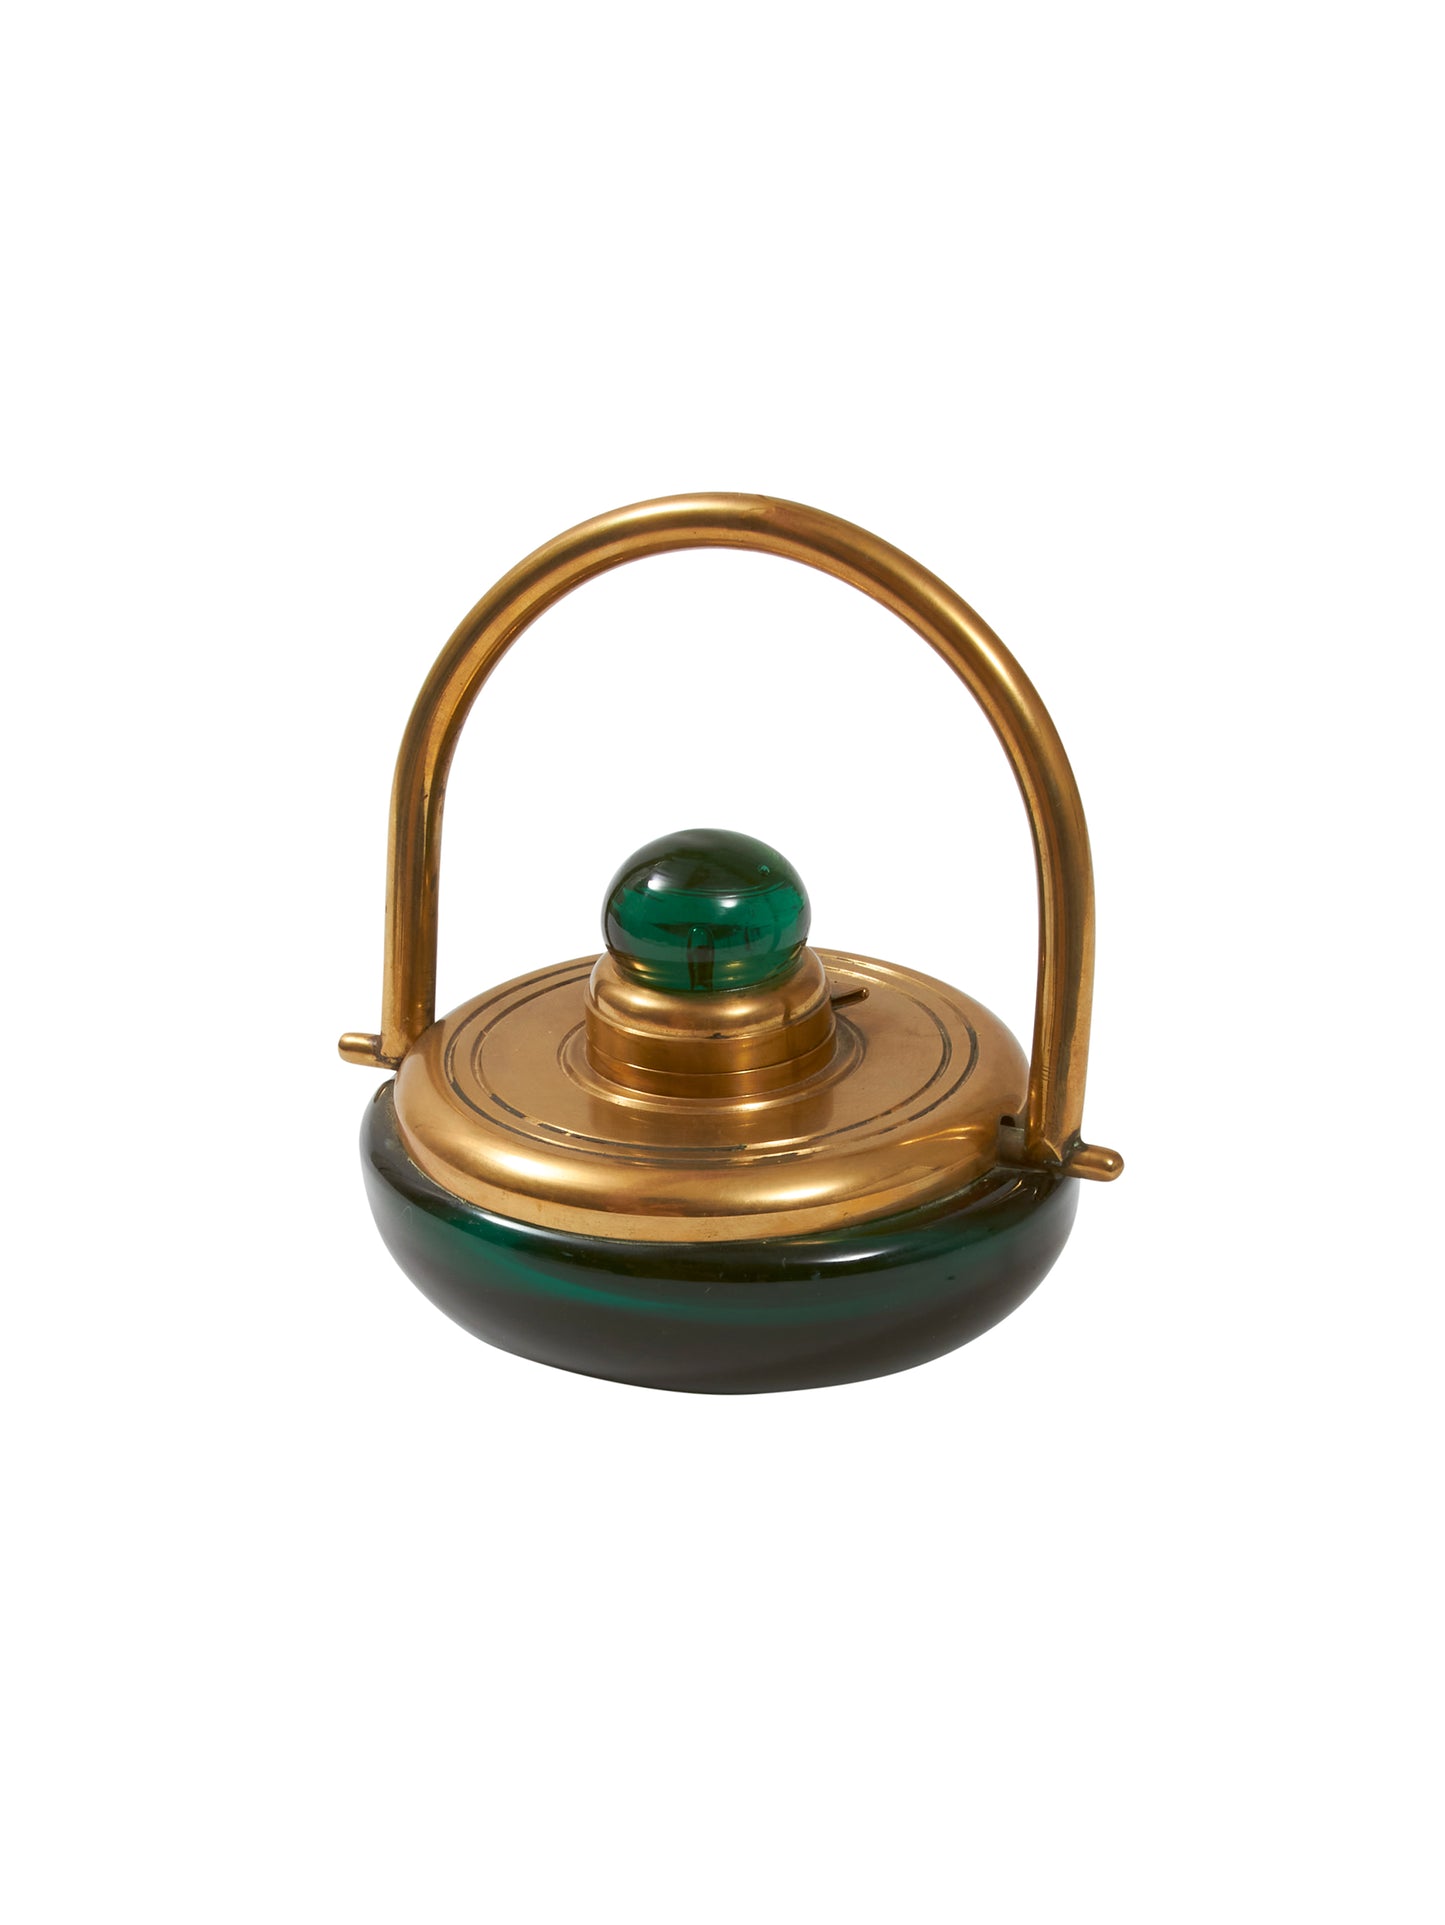 Shop the Vintage 1900 English Emerald Glass and Brass Inkwell at Weston  Table